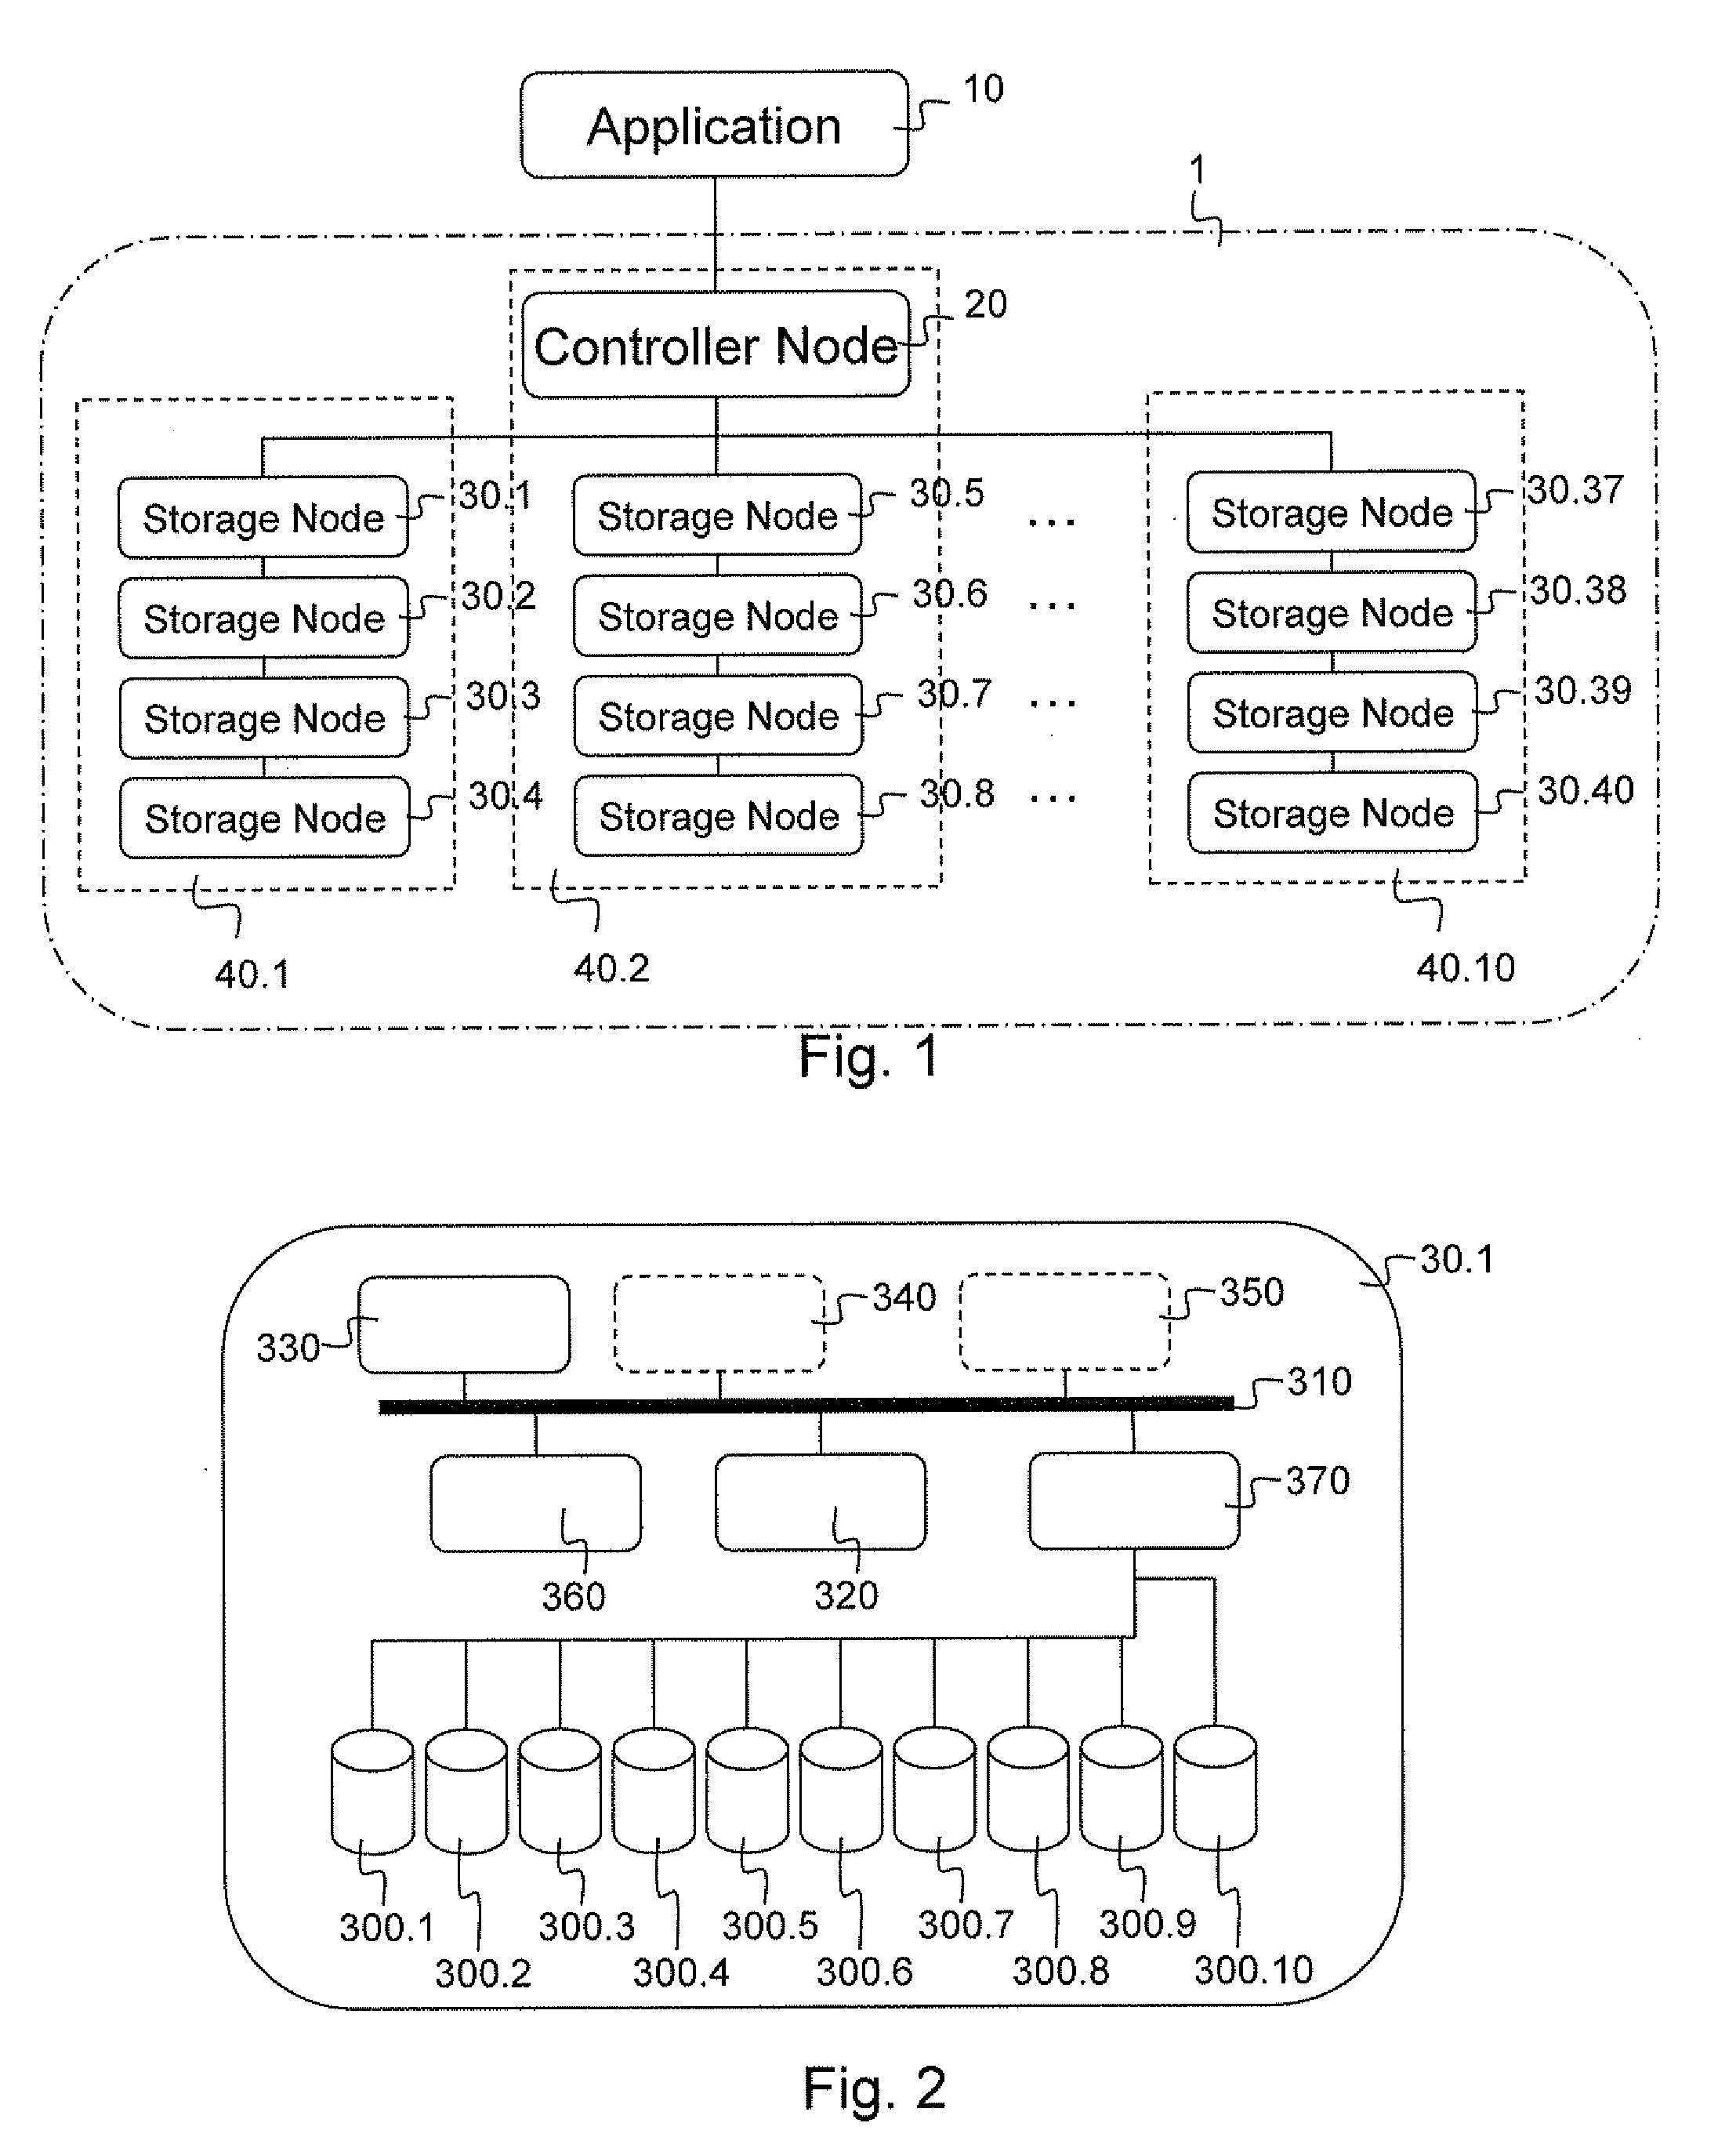 Distributed object storage system